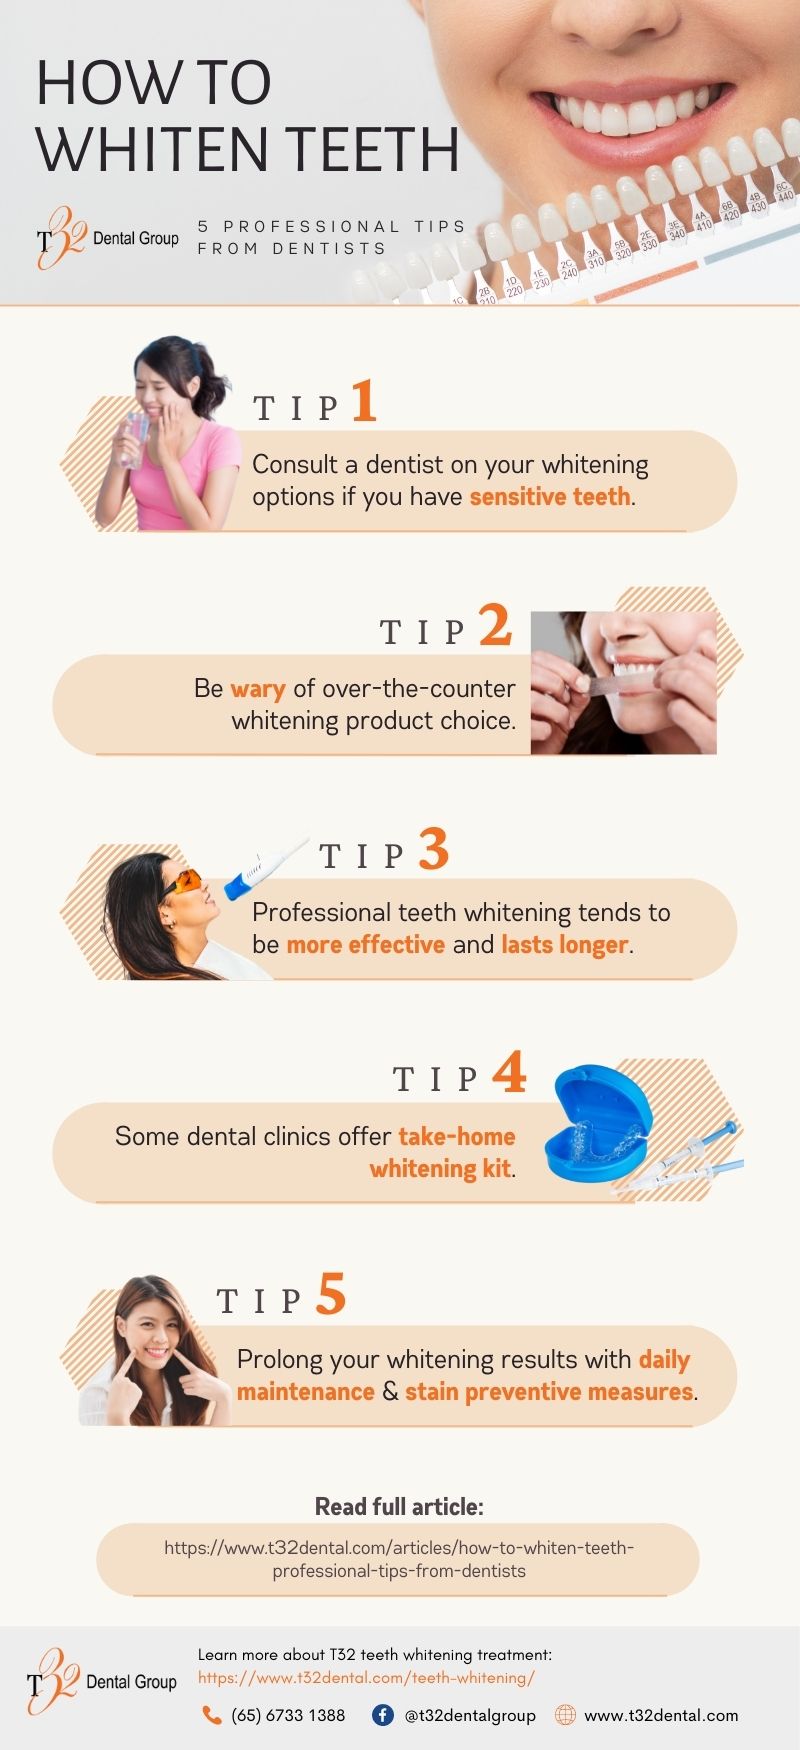 How to Whiten Teeth infographic